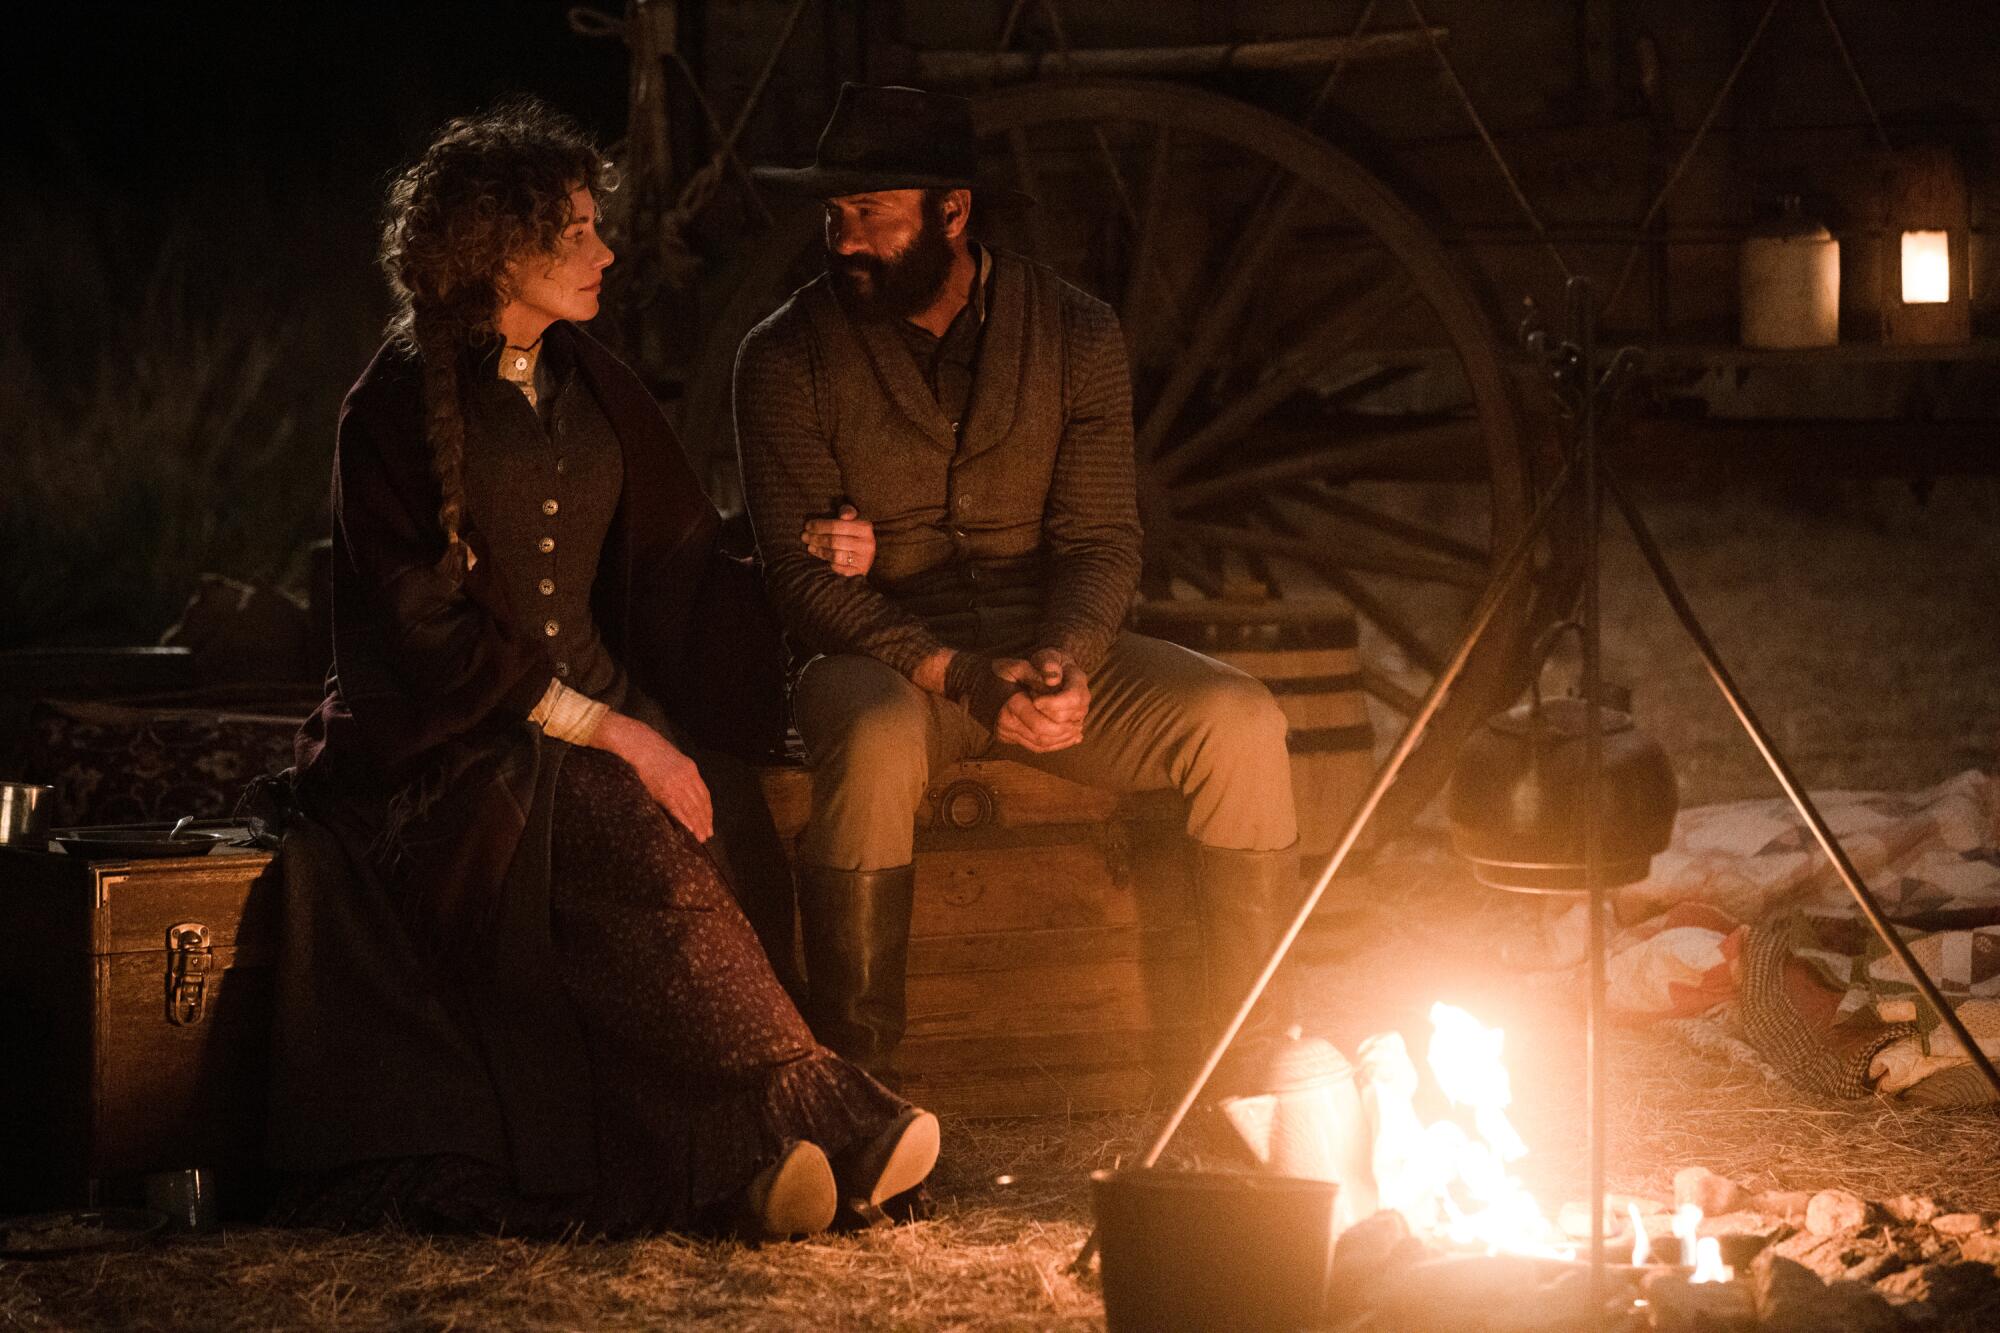 Faith Hill and Tim McGraw in "1883," part of Taylor Sheridan's "Yellowstone" universe.